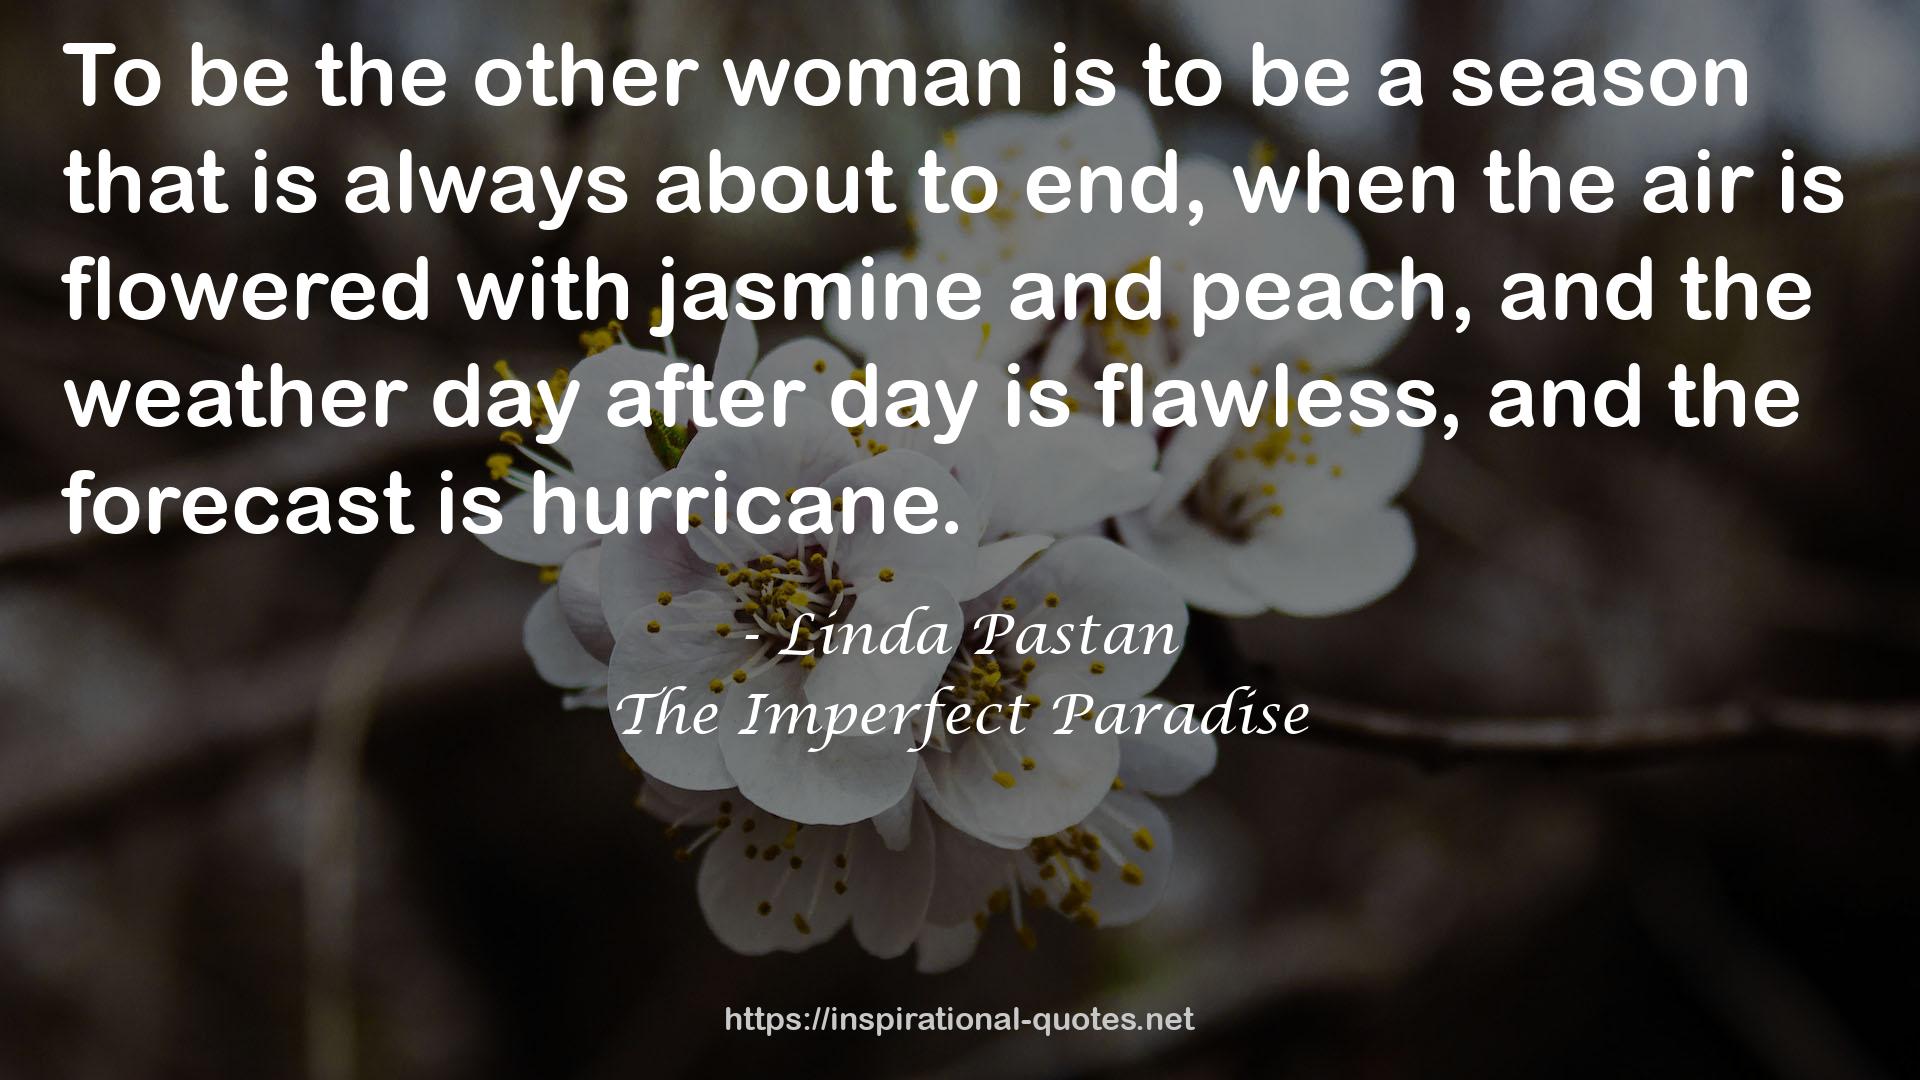 The Imperfect Paradise QUOTES